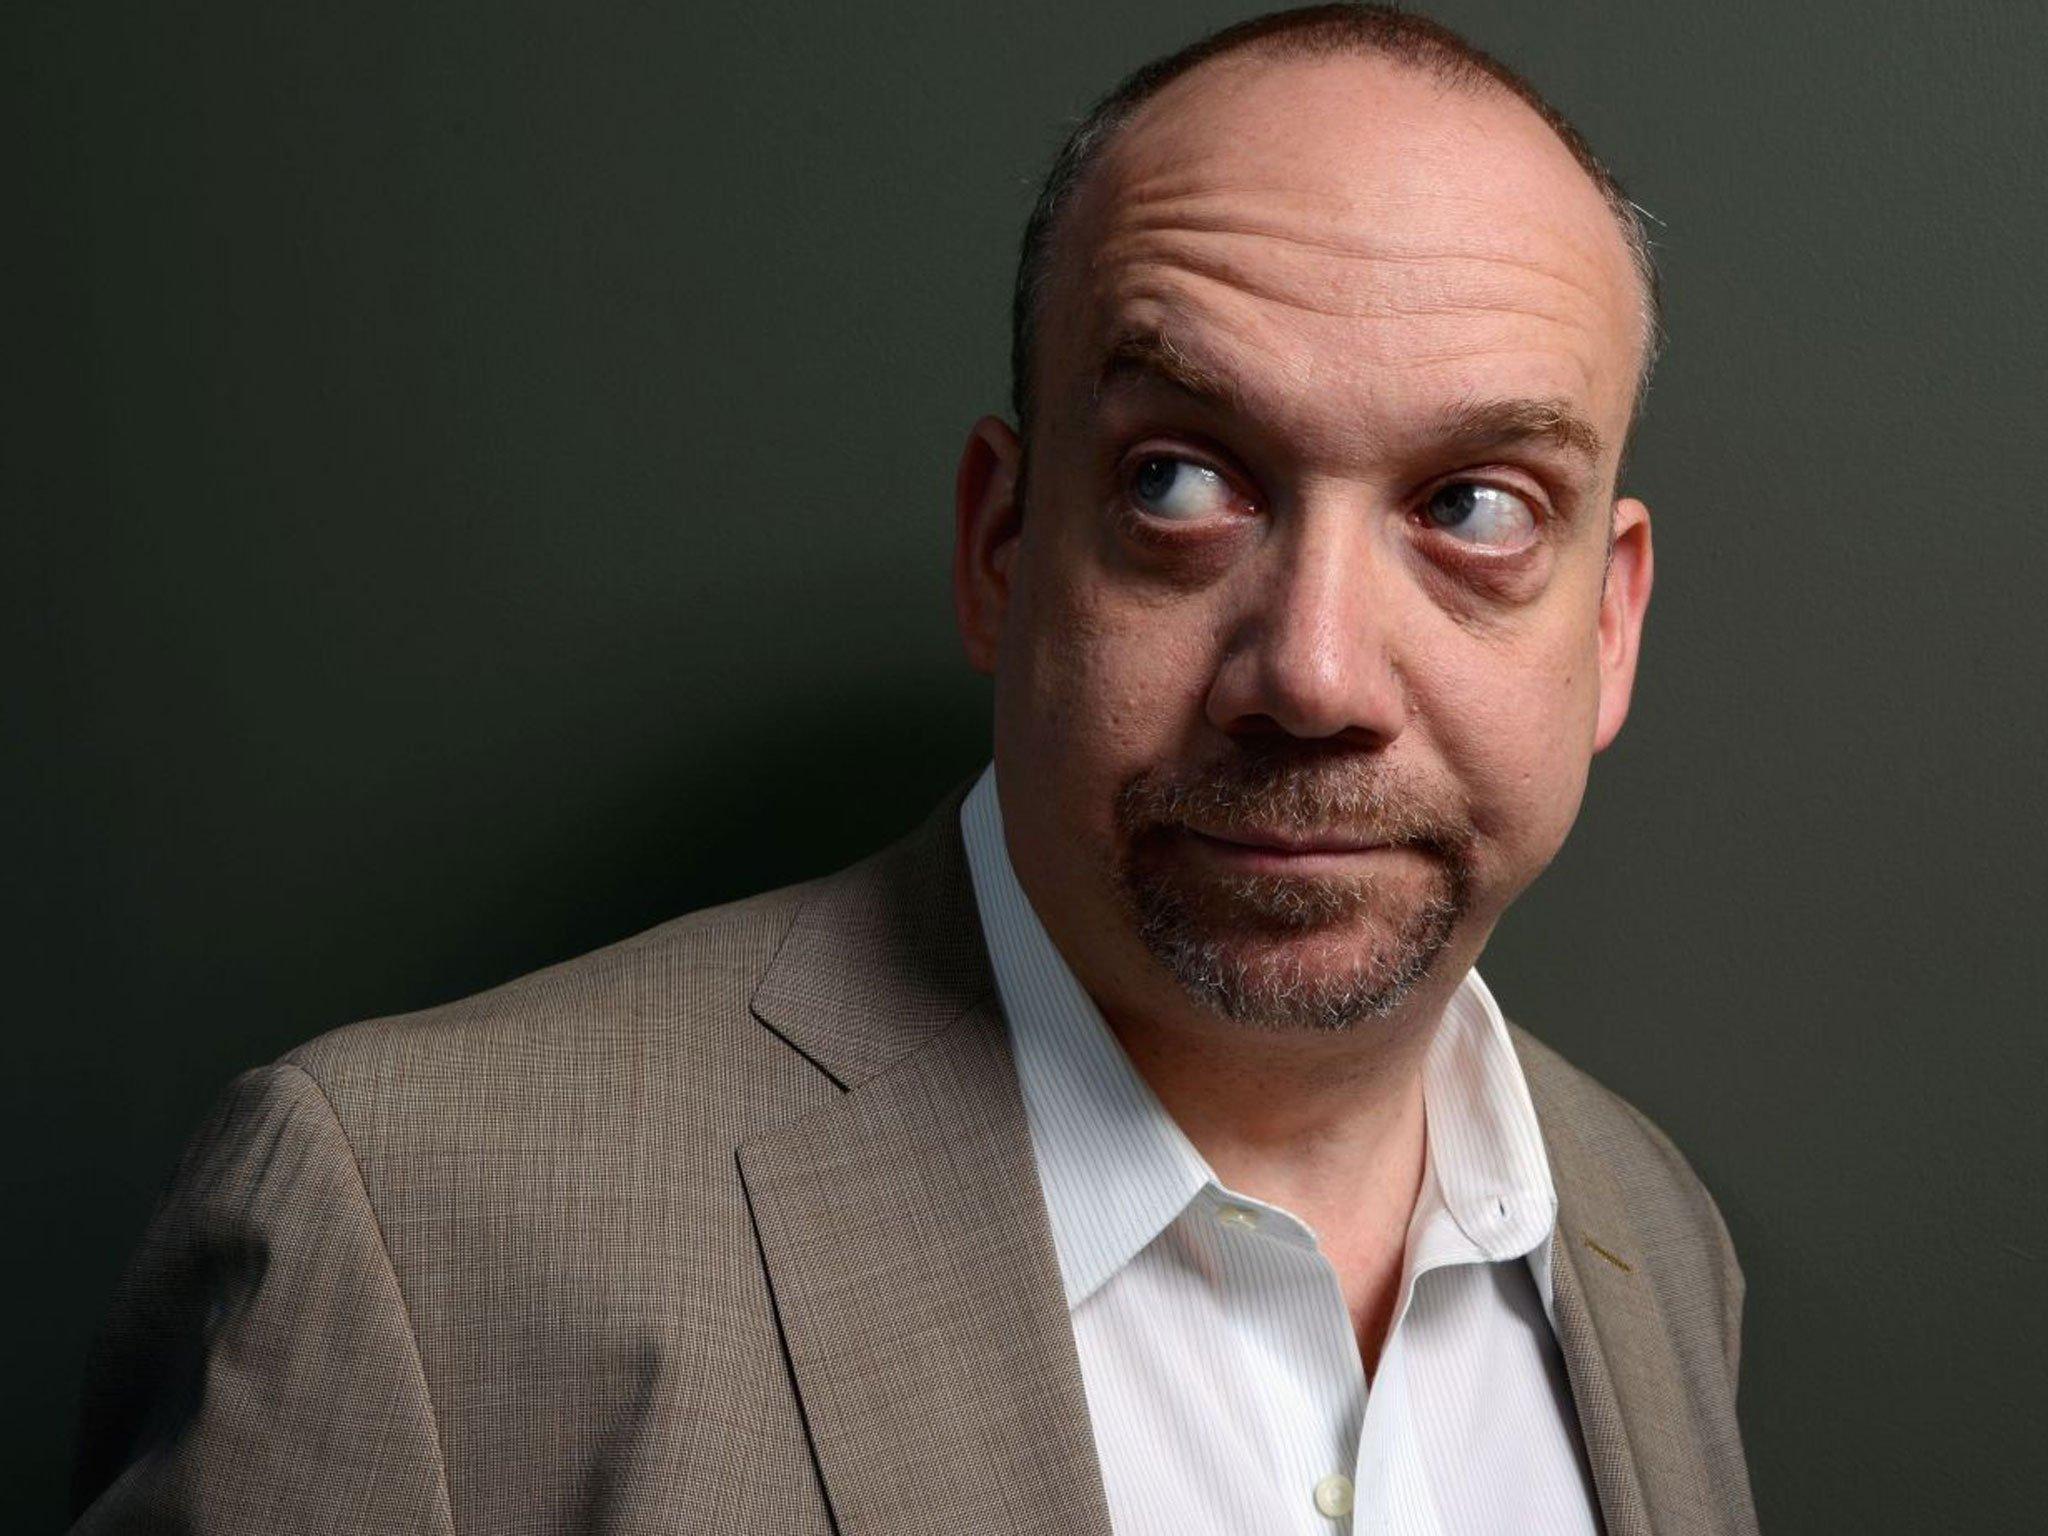 Interview: Paul Giamatti - 'I'm typecast, but that's fine with me